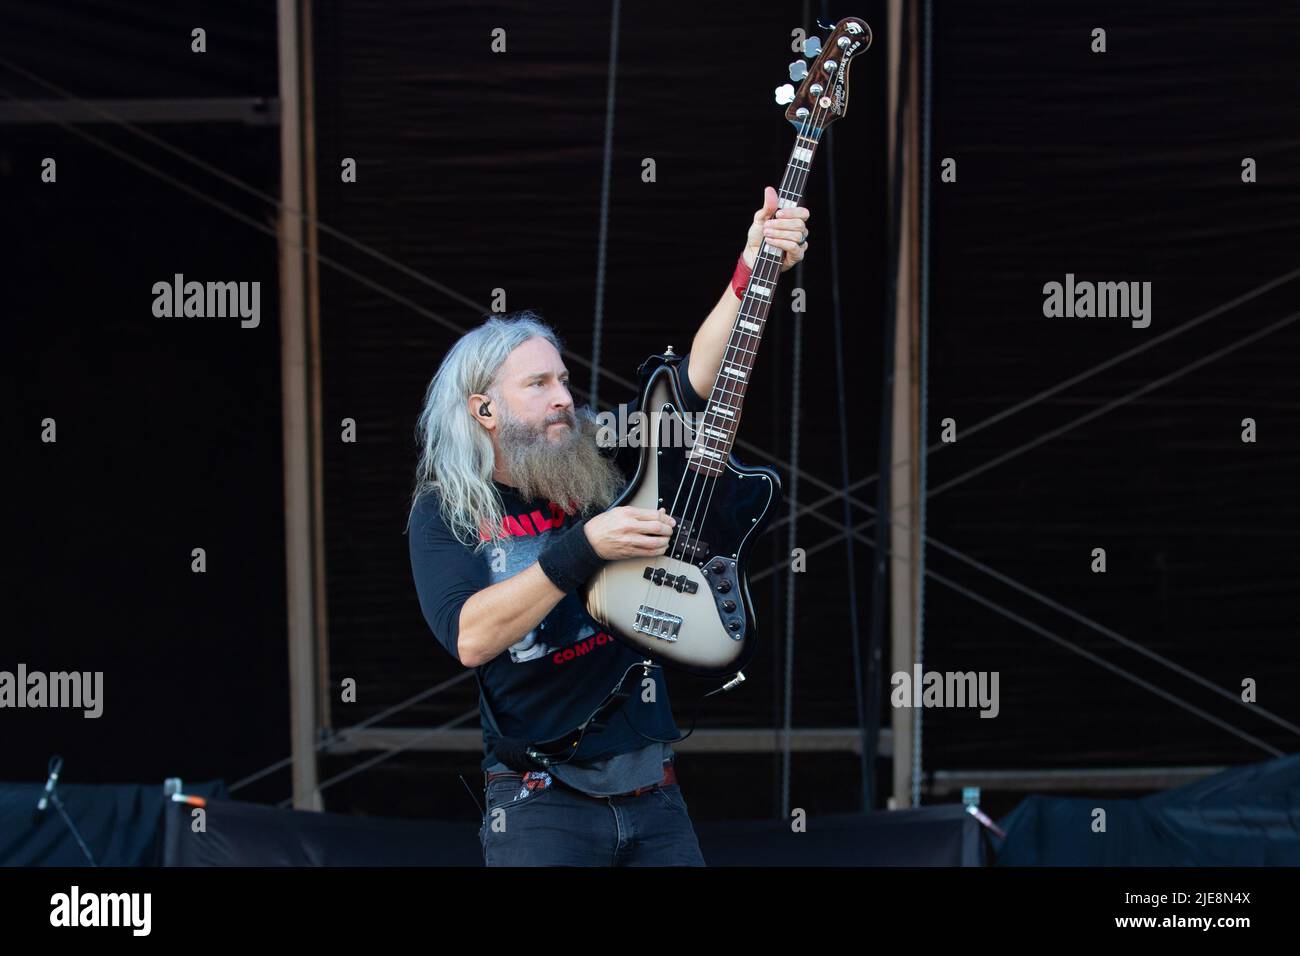 Oslo, Norway. 23rd, June 2022. The American metal band Mastodon performs a live concert during the Norwegian music festival Tons of Rock 2022 in Oslo. Here vocalist and bass player Troy Sanders is seen live on stage. (Photo credit: Gonzales Photo - Per-Otto Oppi). Stock Photo